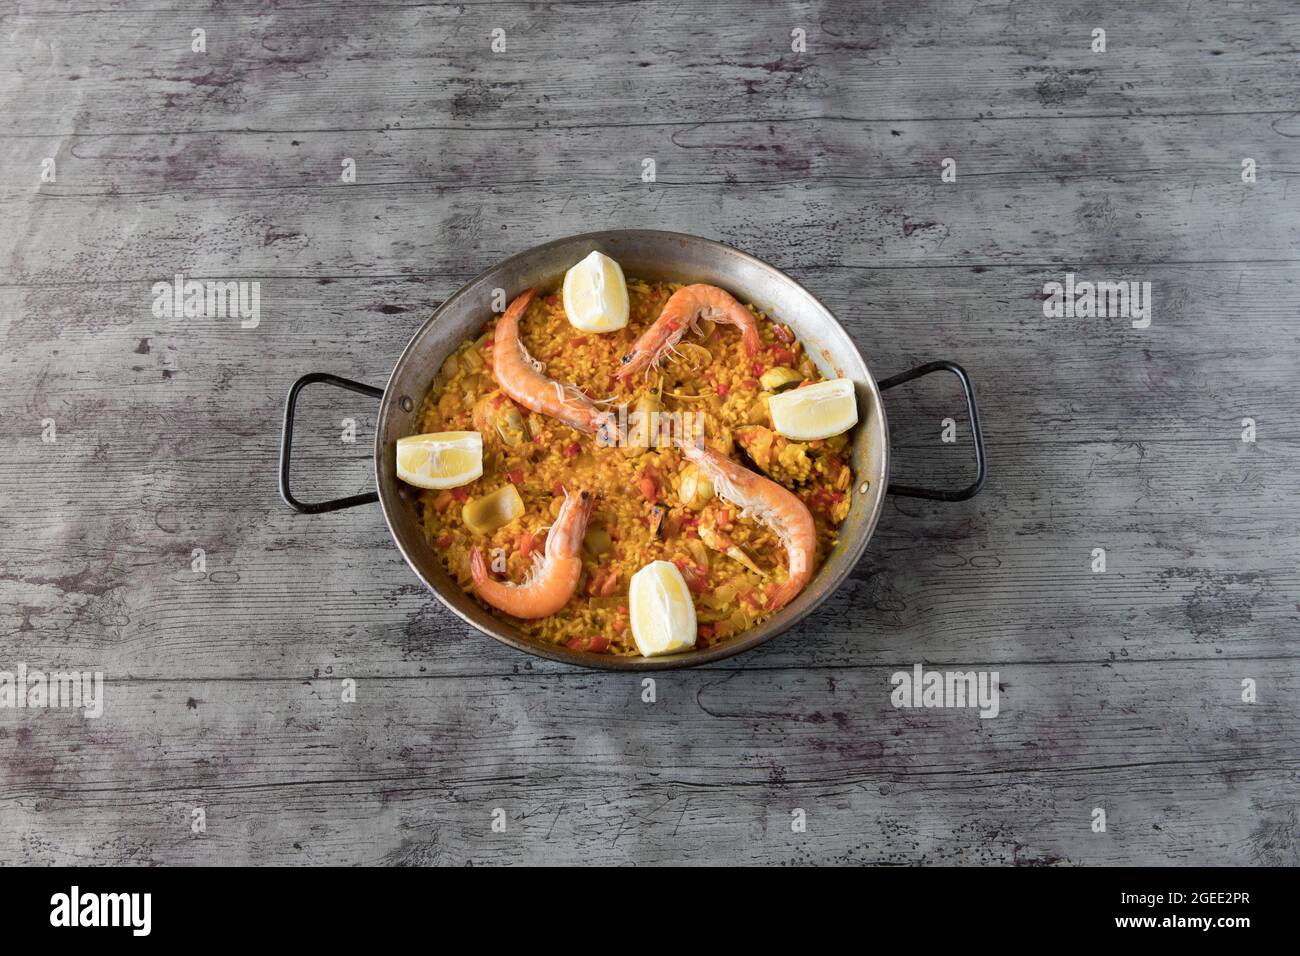 Dish above view, mediterranean food fusion creative plate. Spain food. Stock Photo